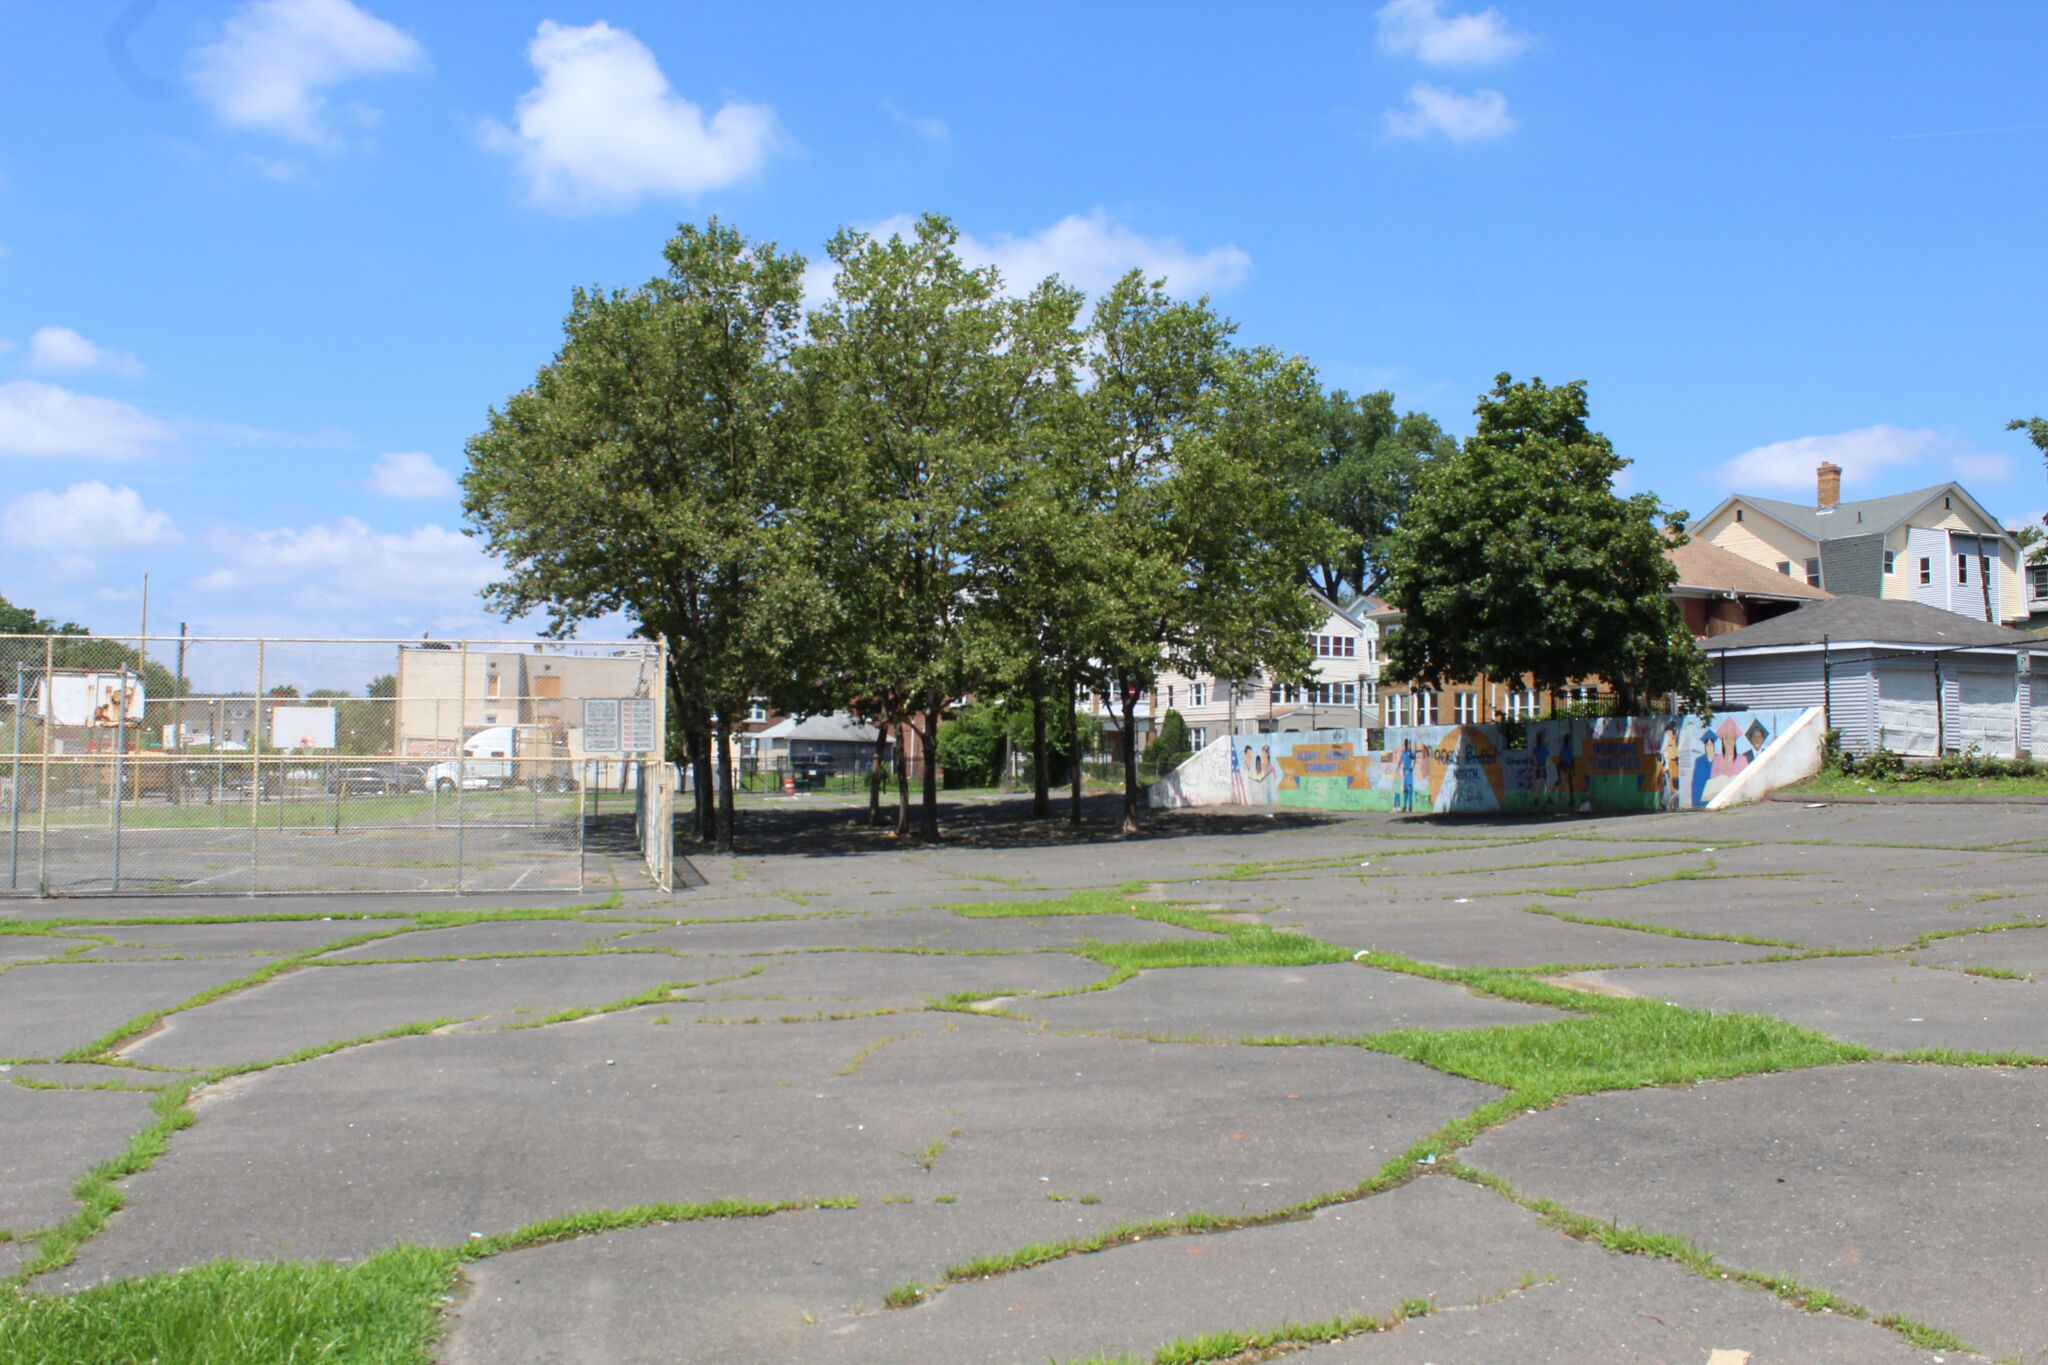 Why Hartford residents advocated for apartments instead of a park